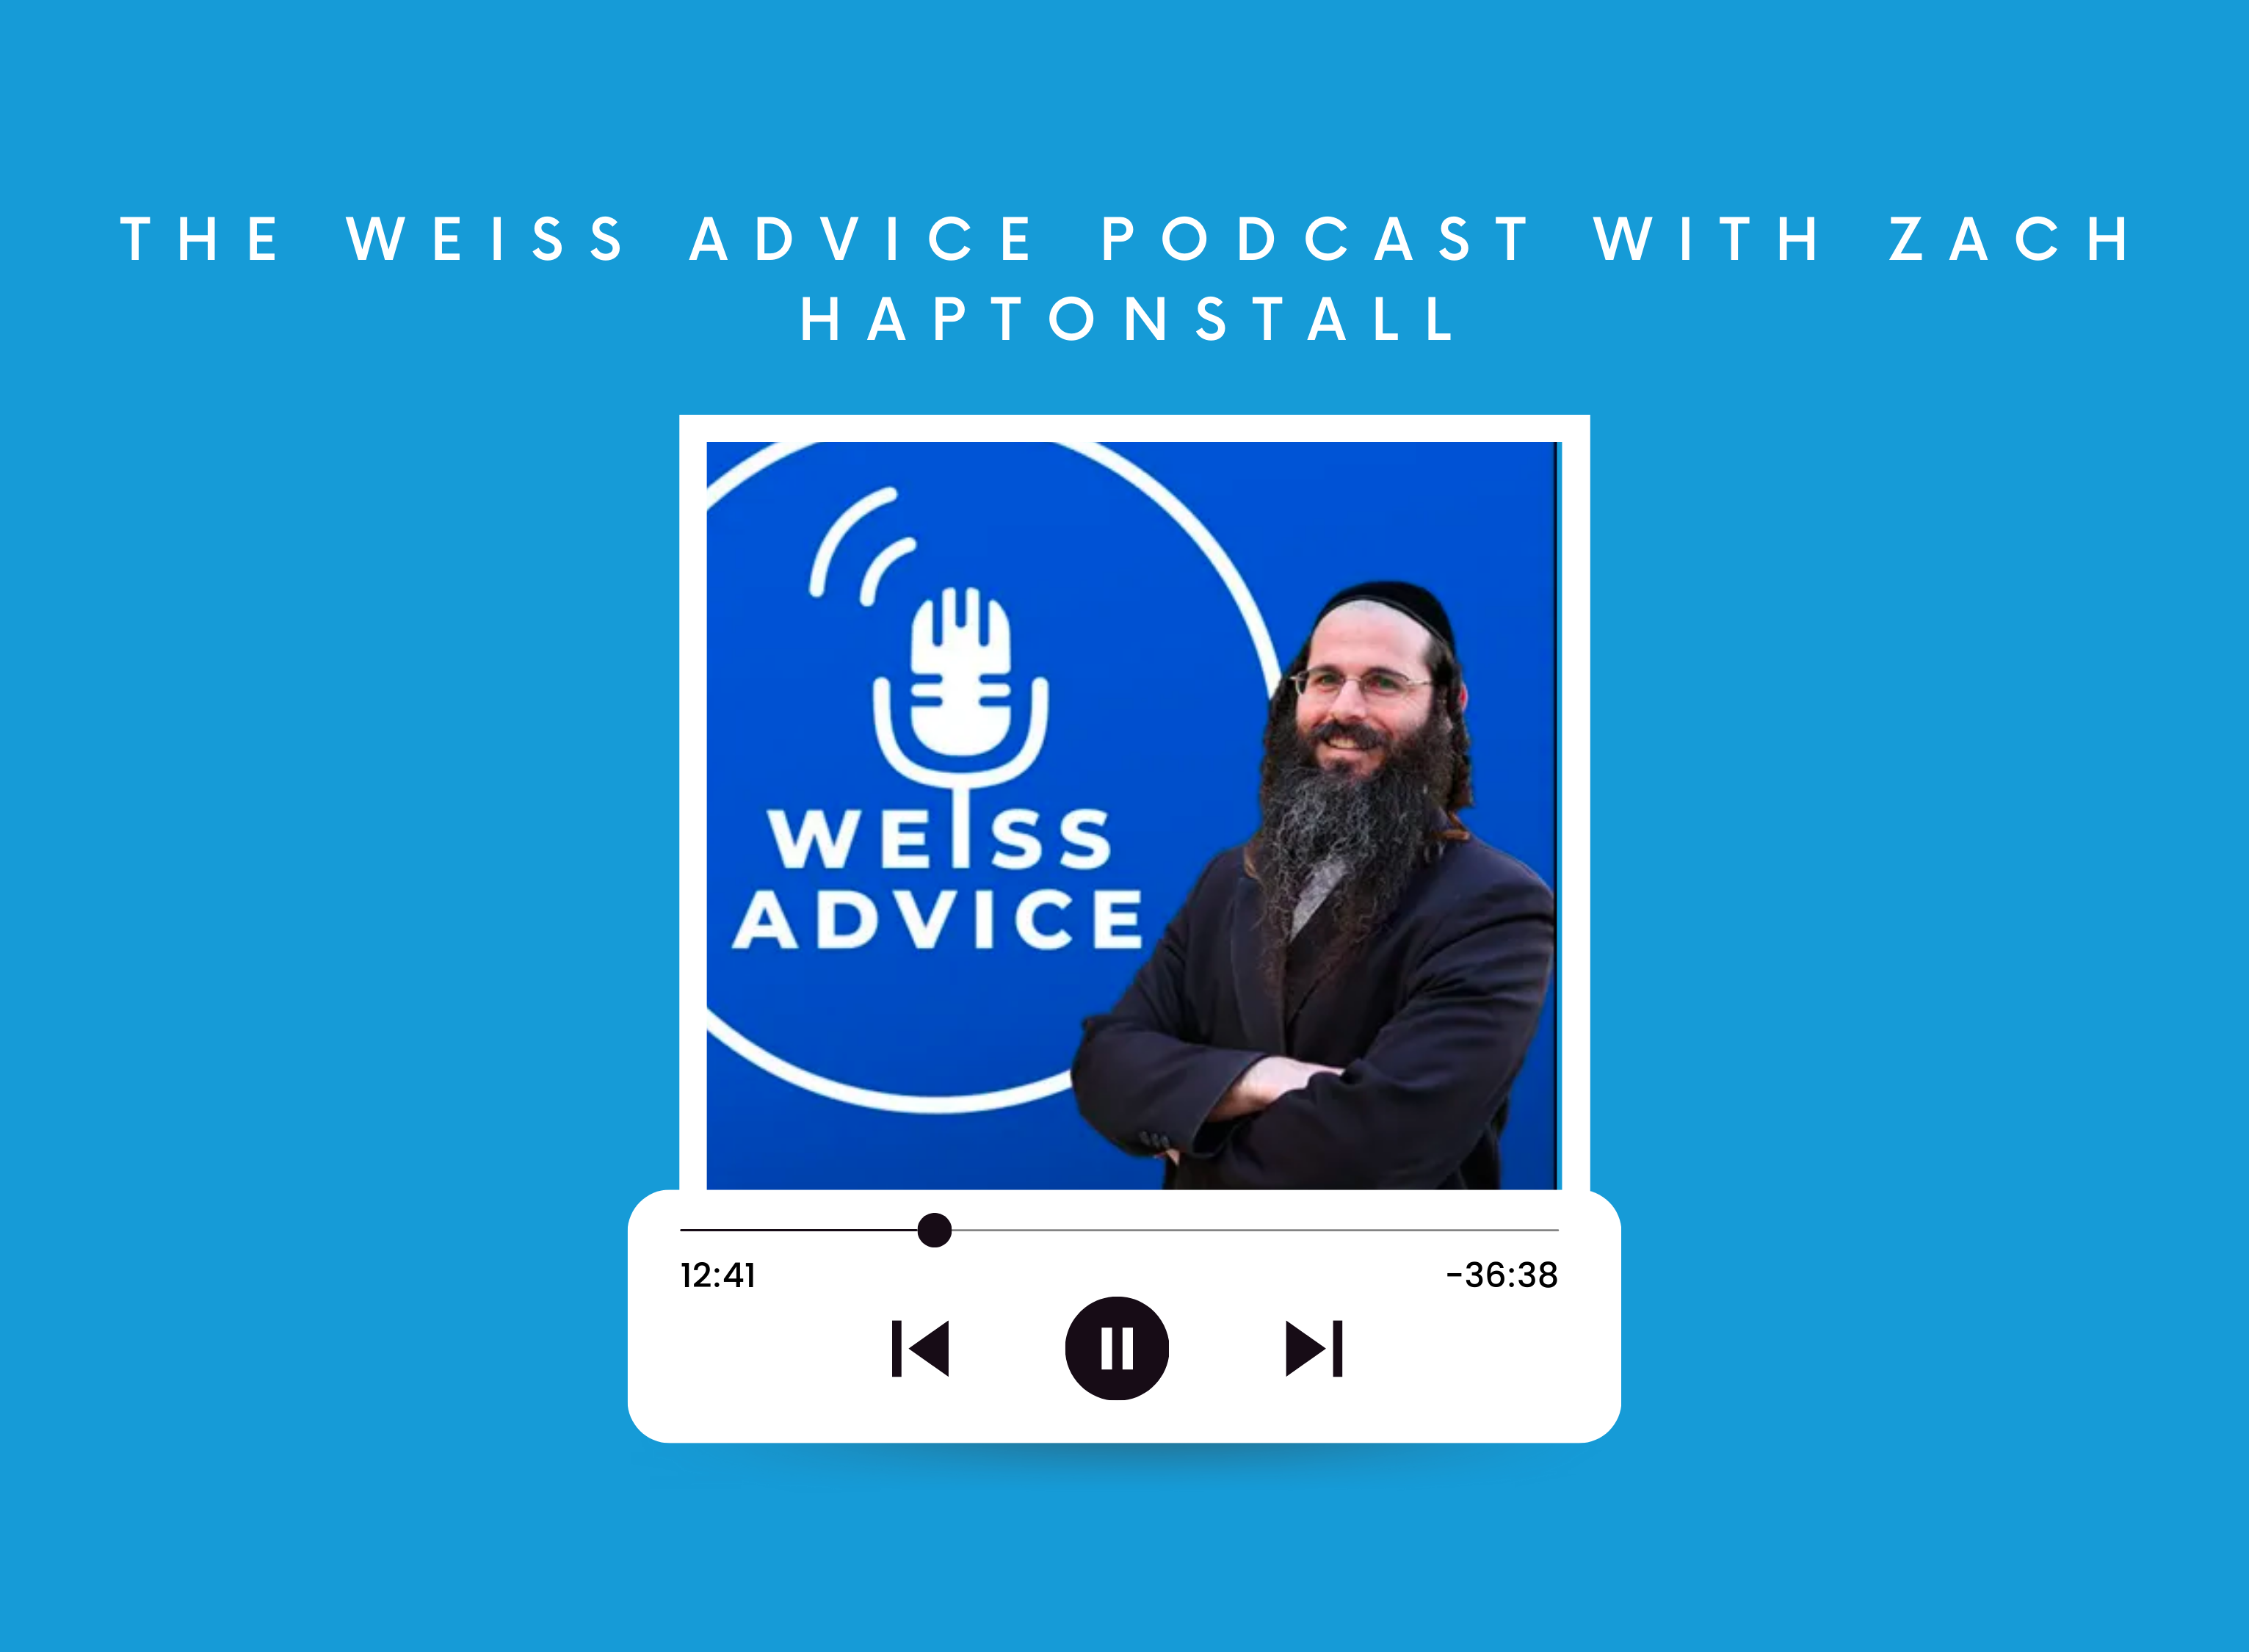 The Weiss Advice Podcast